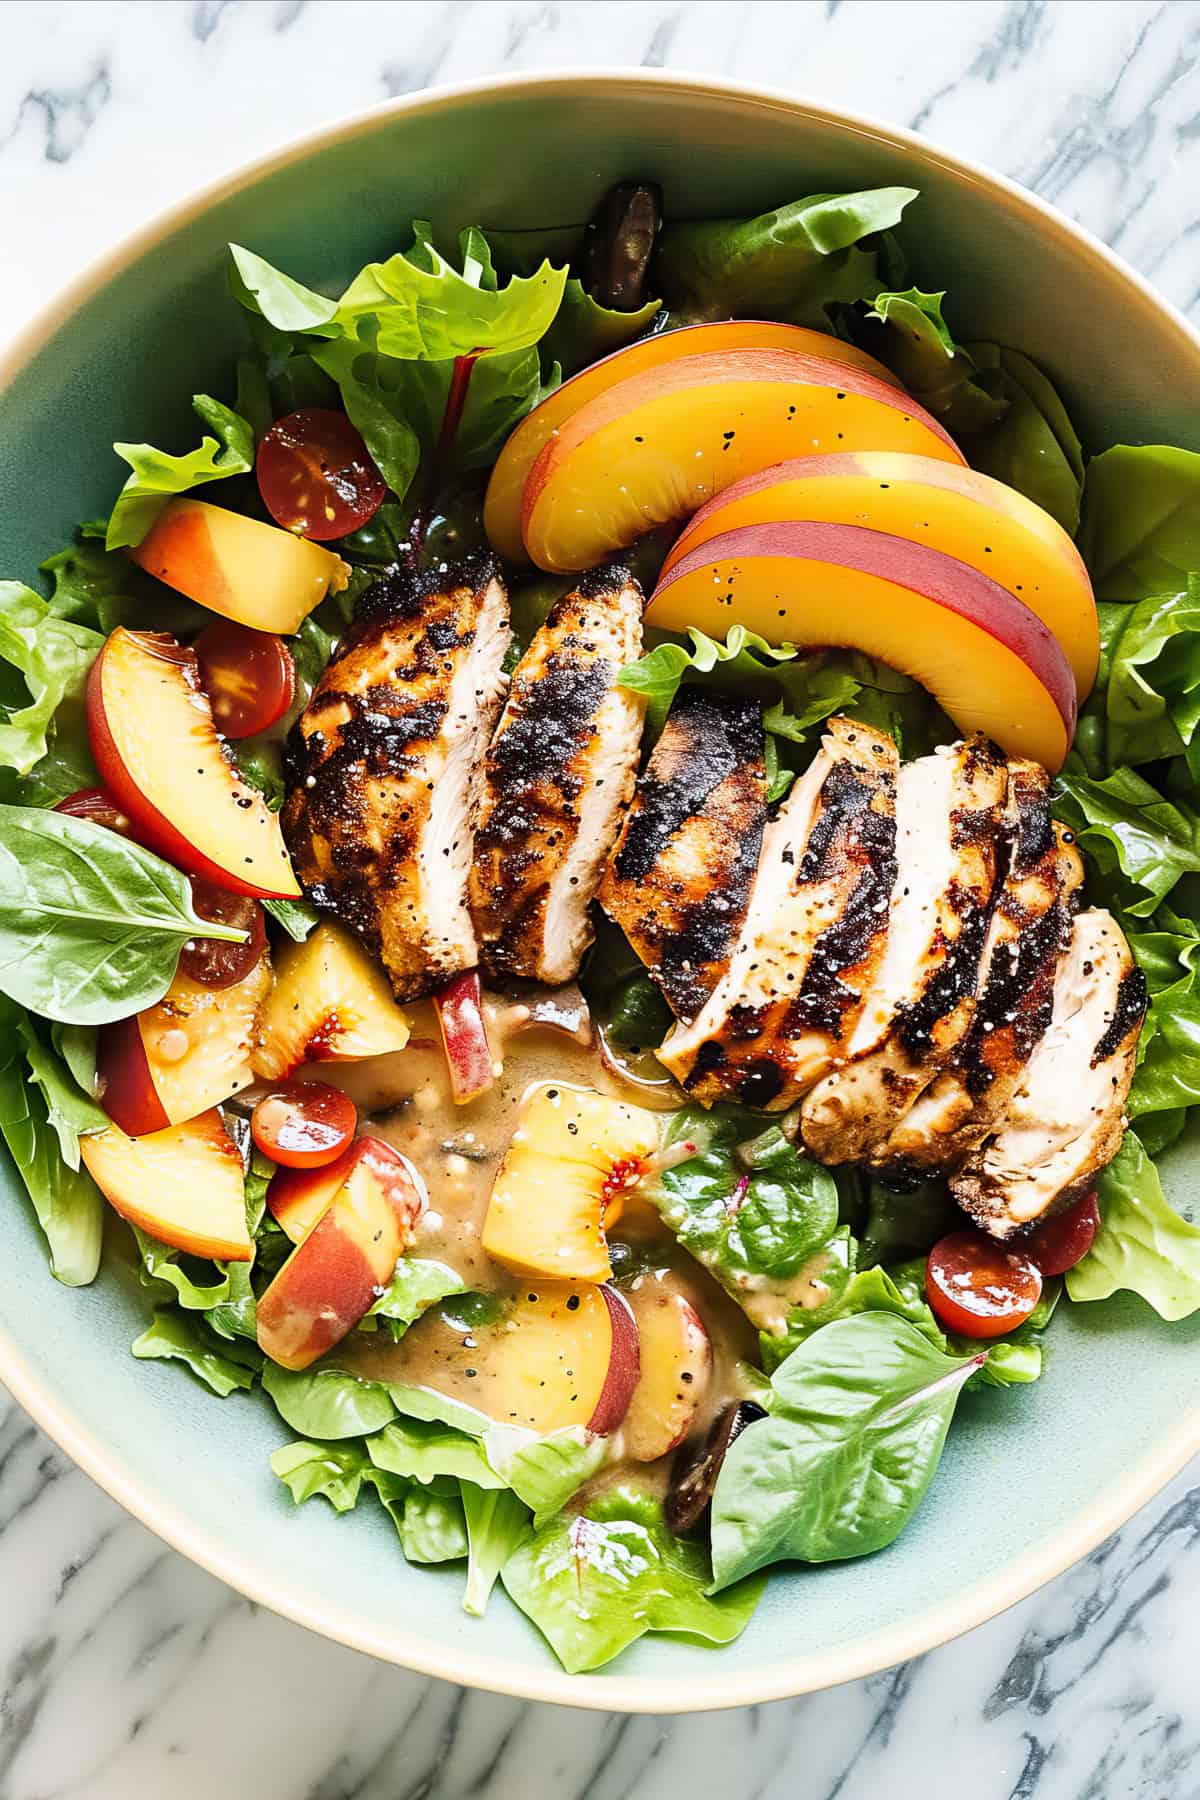 Maple chicken grilled with peaches and salad with vinaigrette dressing.